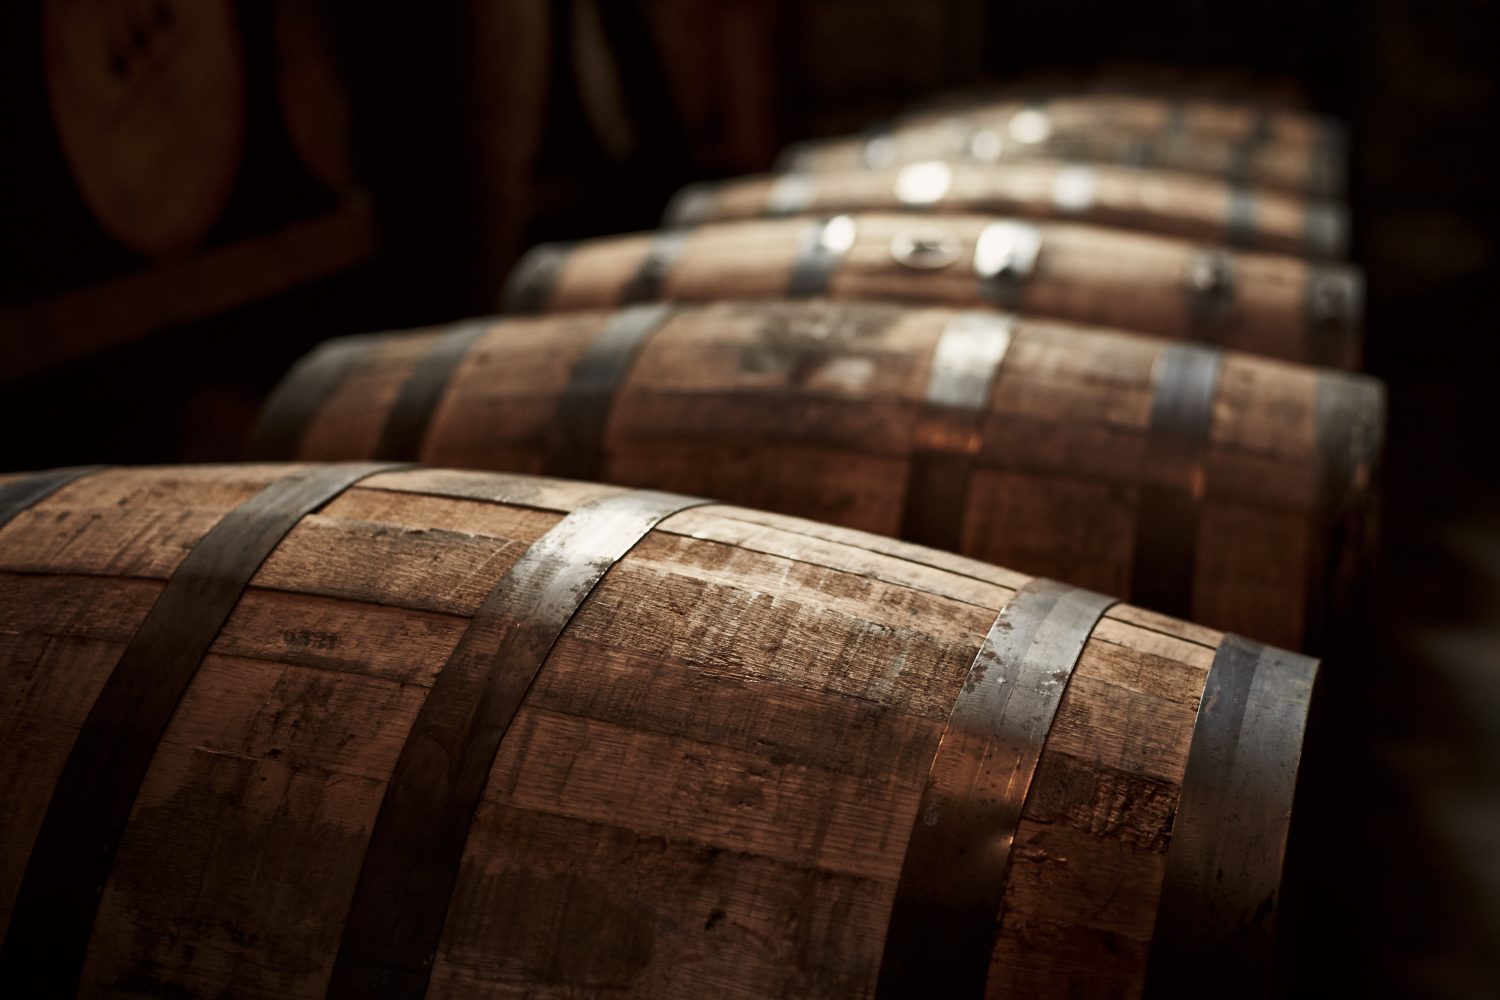 A stock image of bourbon barrels in Kentucky. The bourbon industry is putting together an auction to aid those affected by the Kentucky floods.